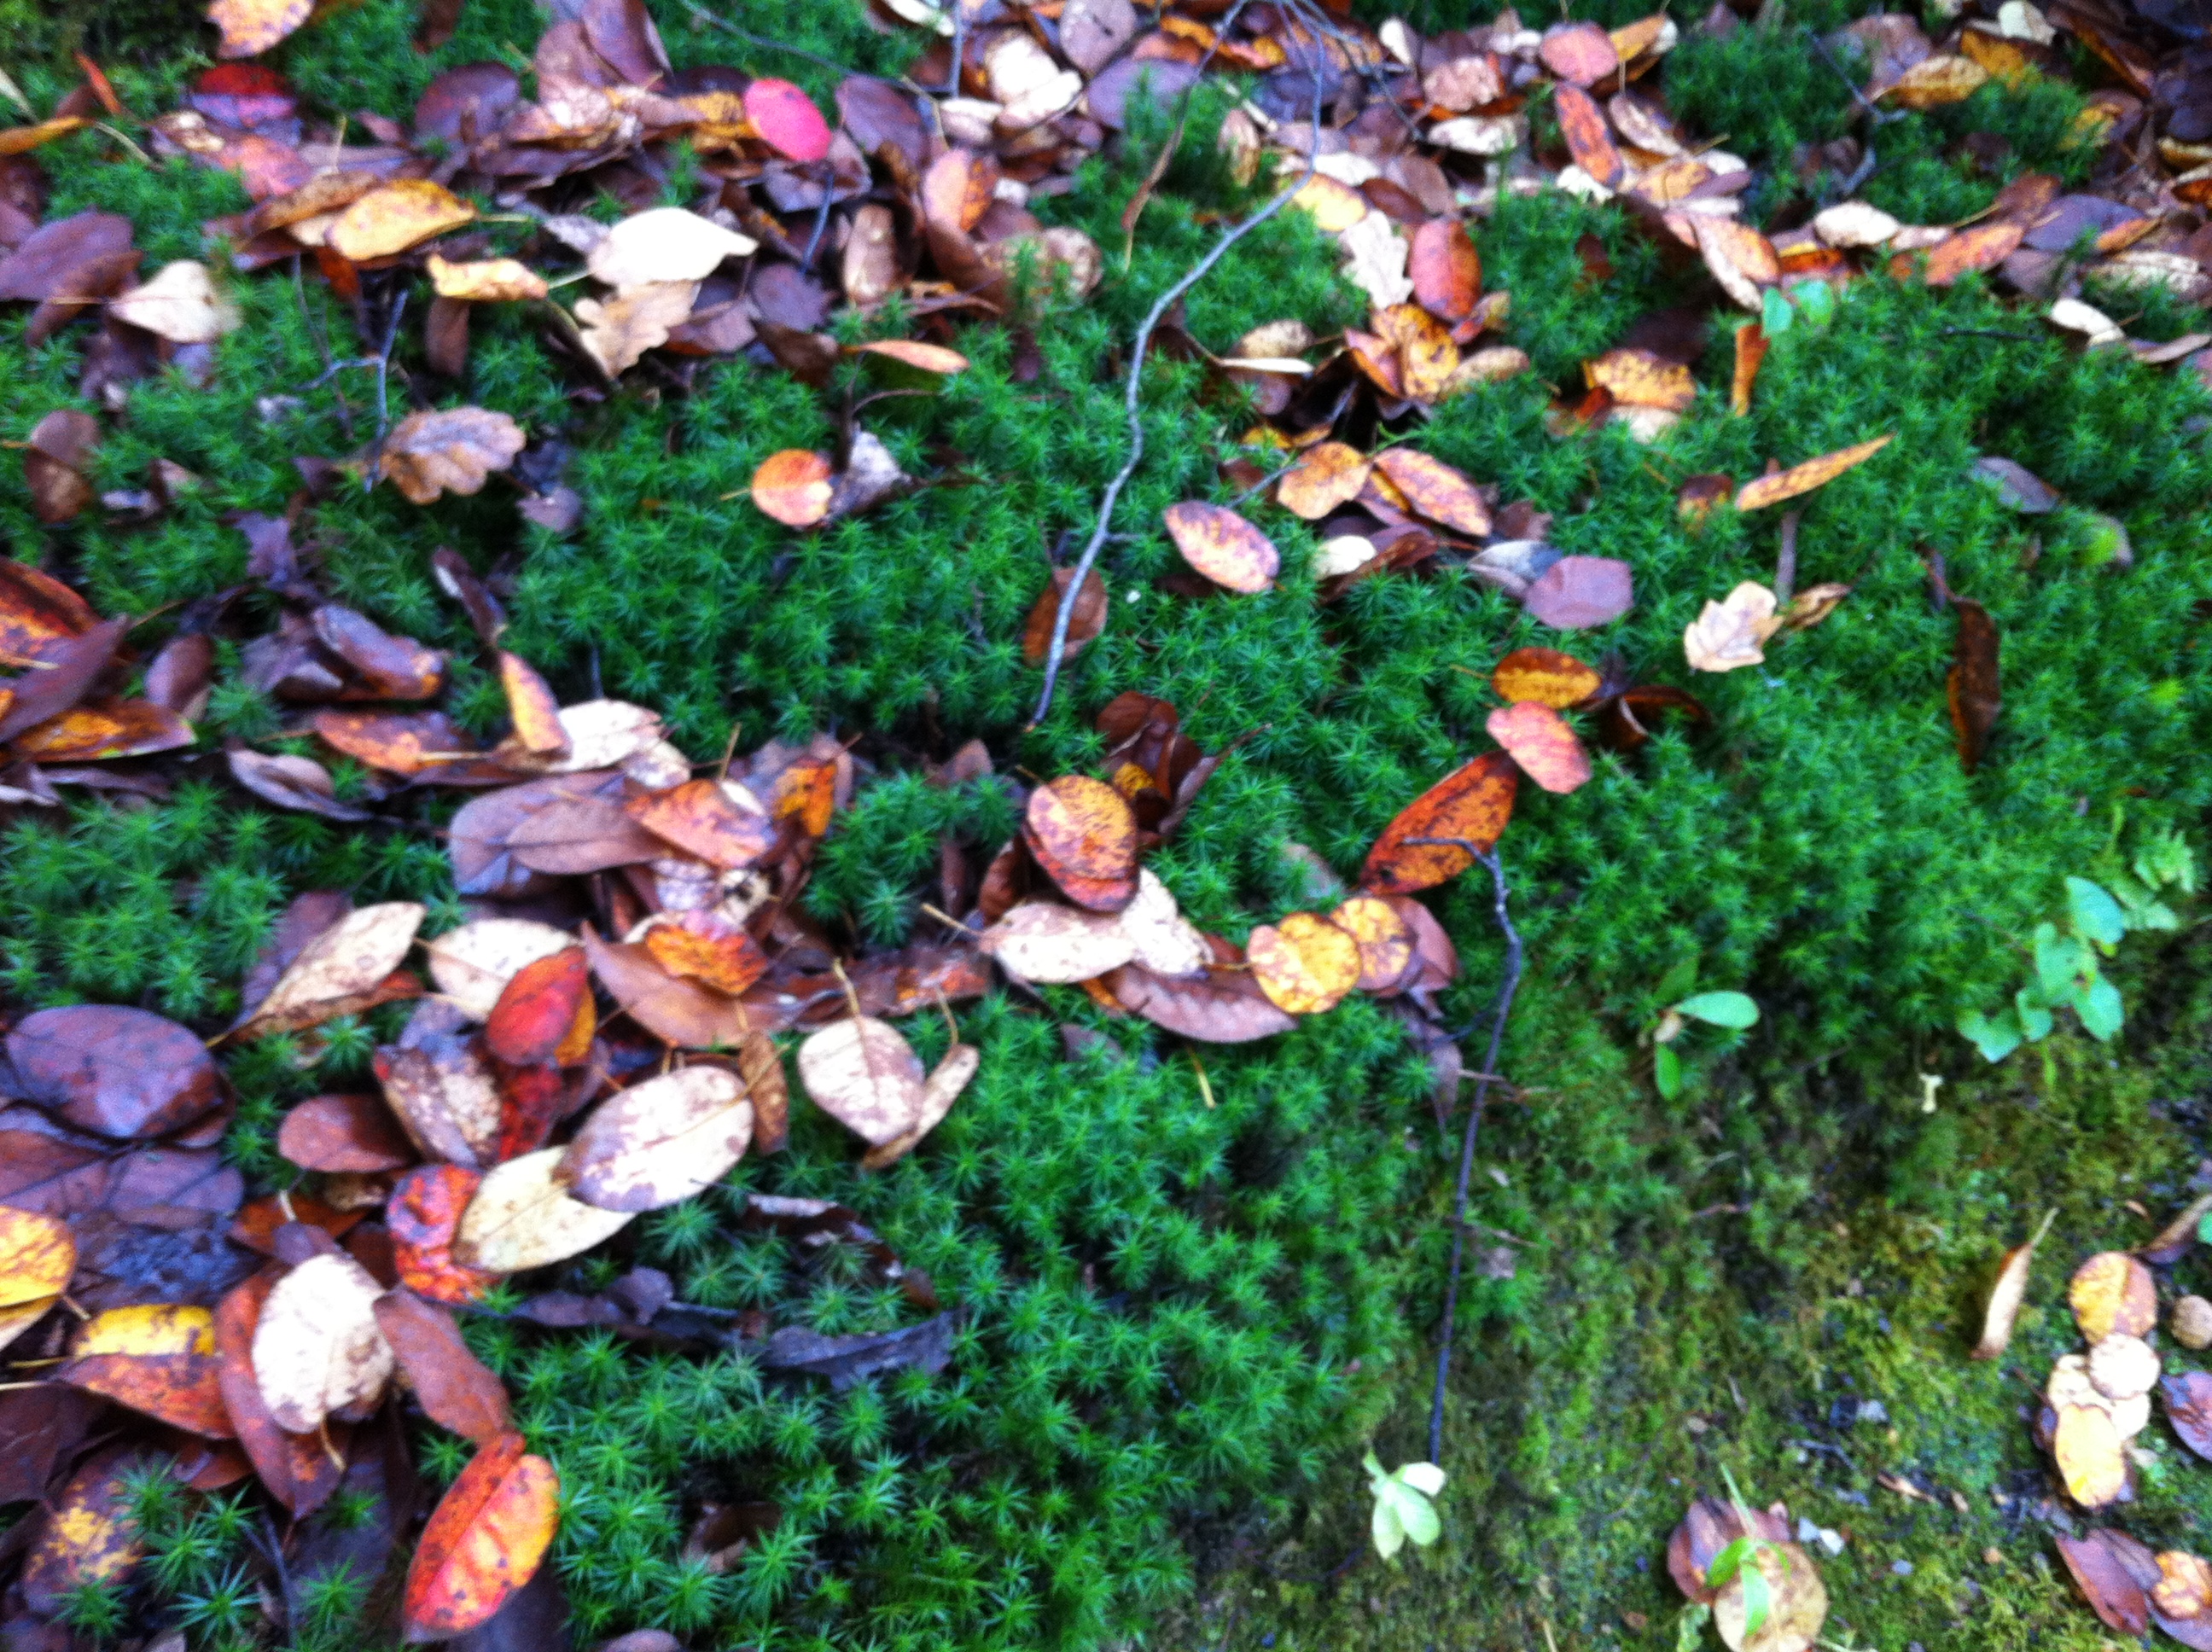 Sussex landscaping - leaves fallen